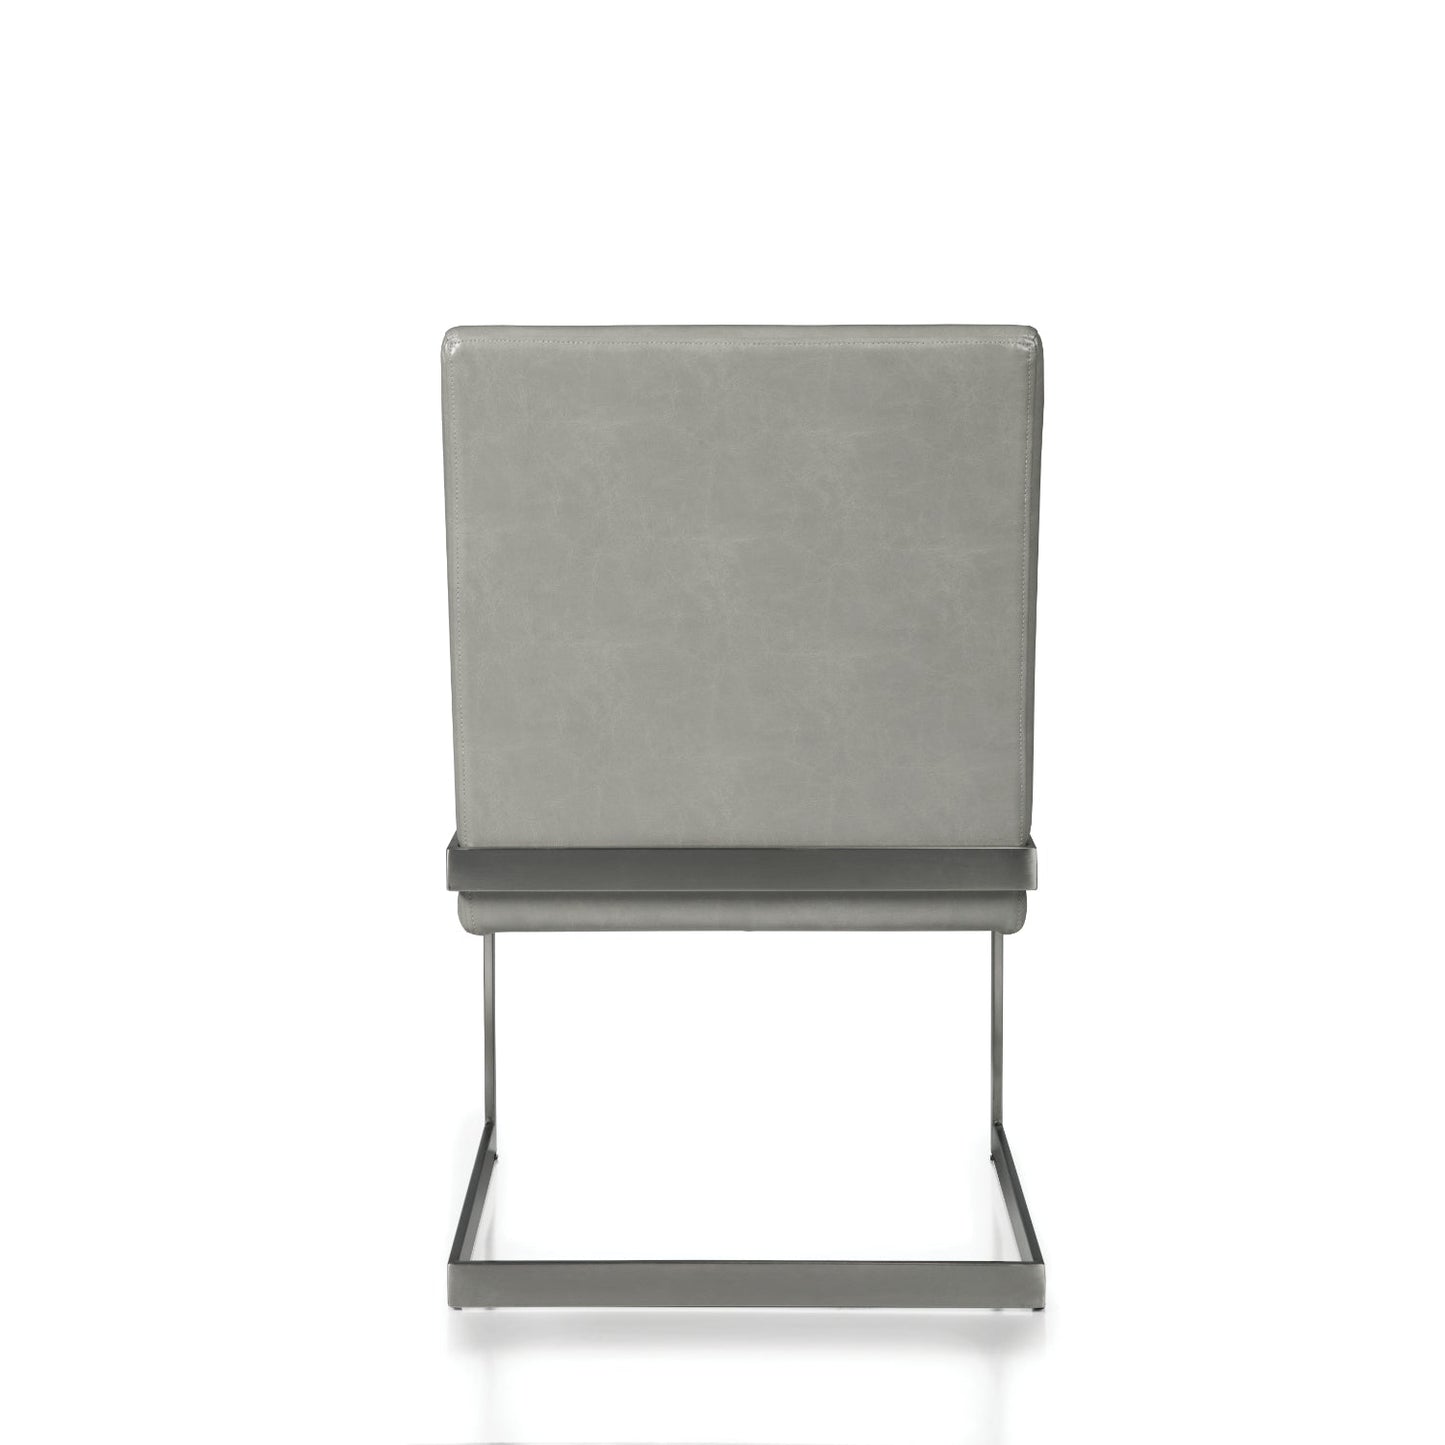 Modus Coral Synthetic Leather Upholstered 2 Dining Chair in Antique Grey